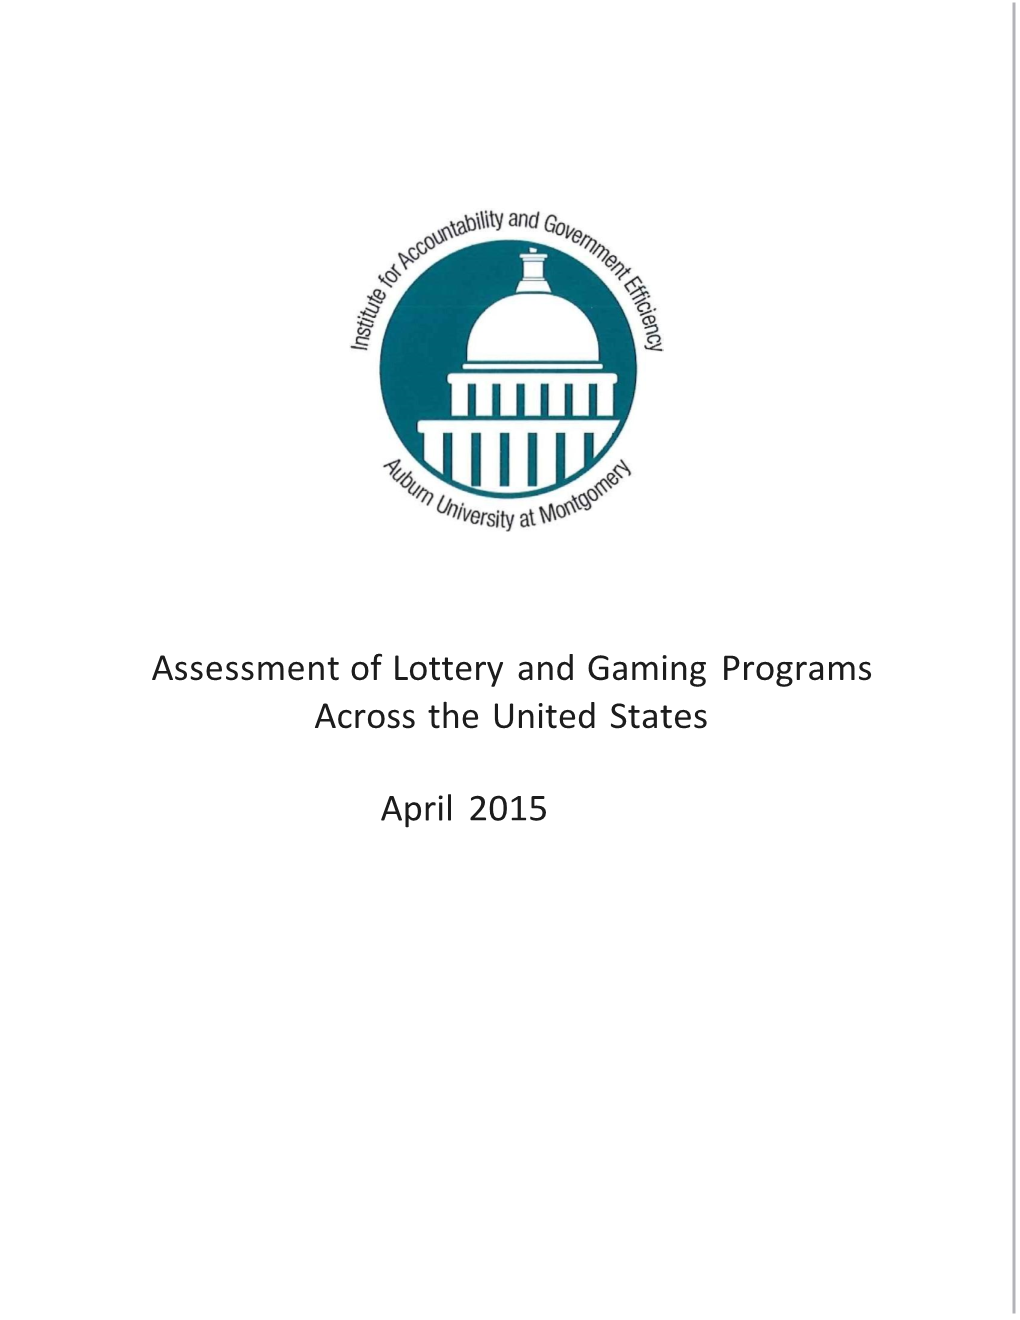 Assessment of Lottery and Gaming Programs Across the United States April 2015